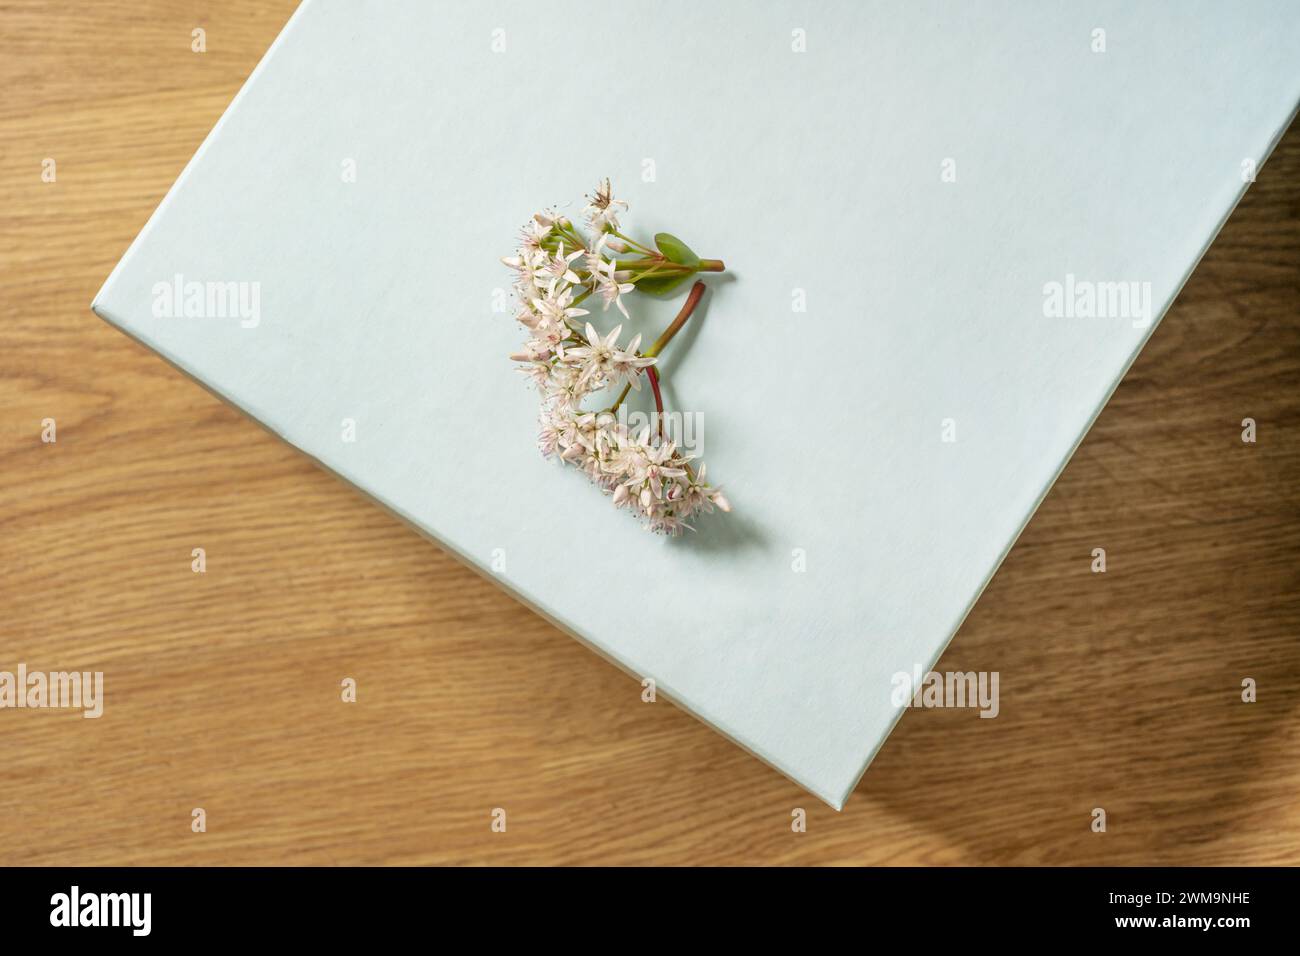 Pretty flowers of freshly cut jade tree succulent plant, Crassula Ovata, on a soft sky blue surface in a room with light wooden floors Stock Photo